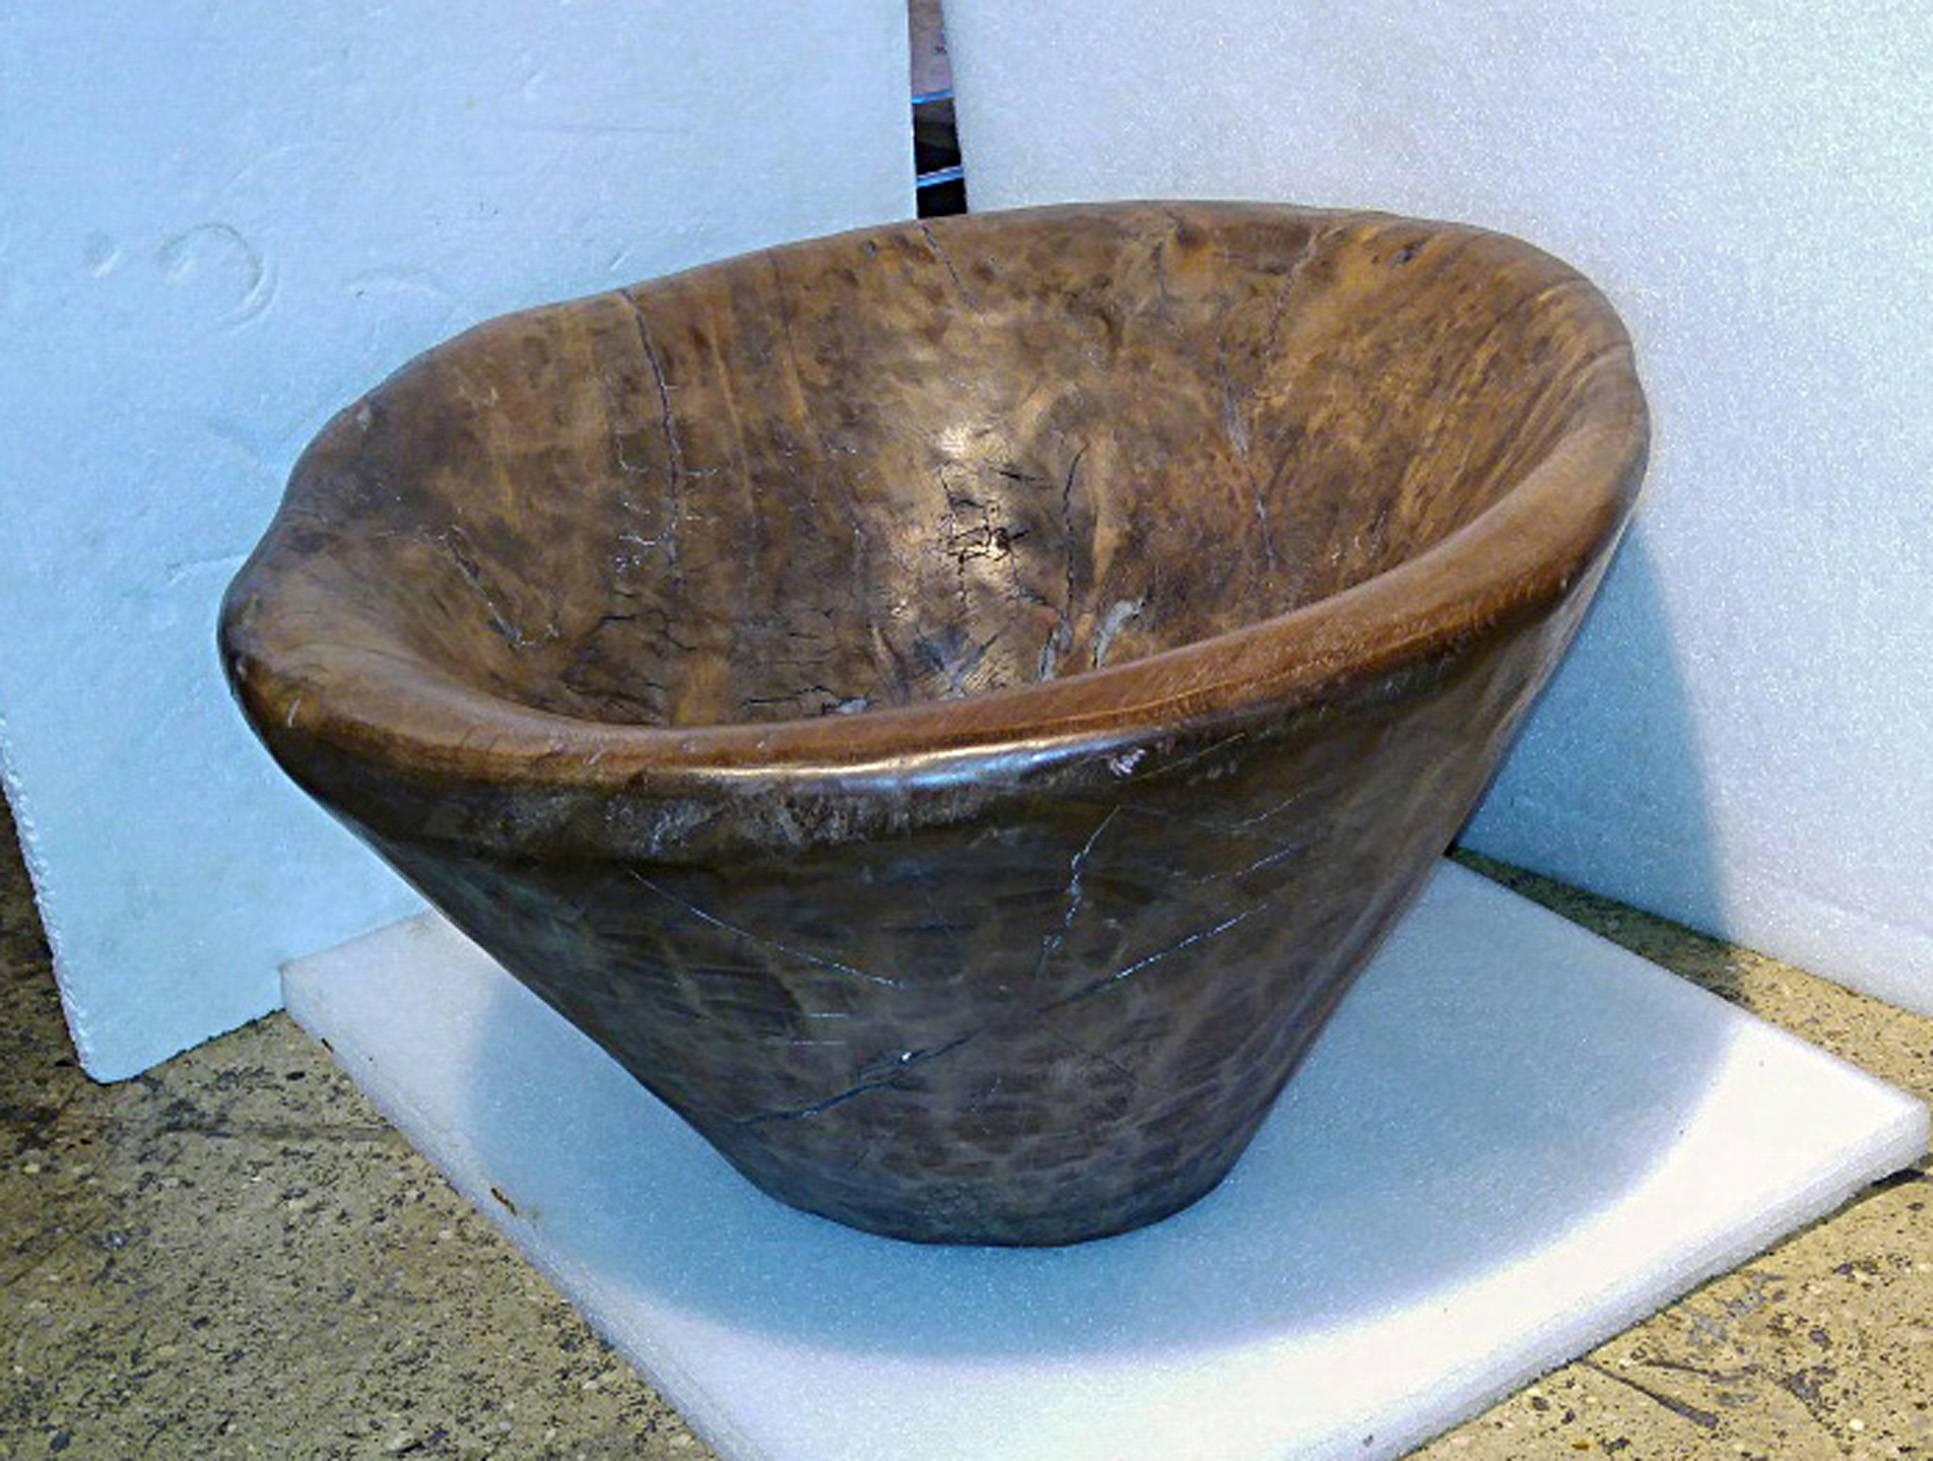 A large hand-carved teakwood bowl from Indonesia. A one-of-a-kind centrepiece for your table or shelf. Other similar bowls available.